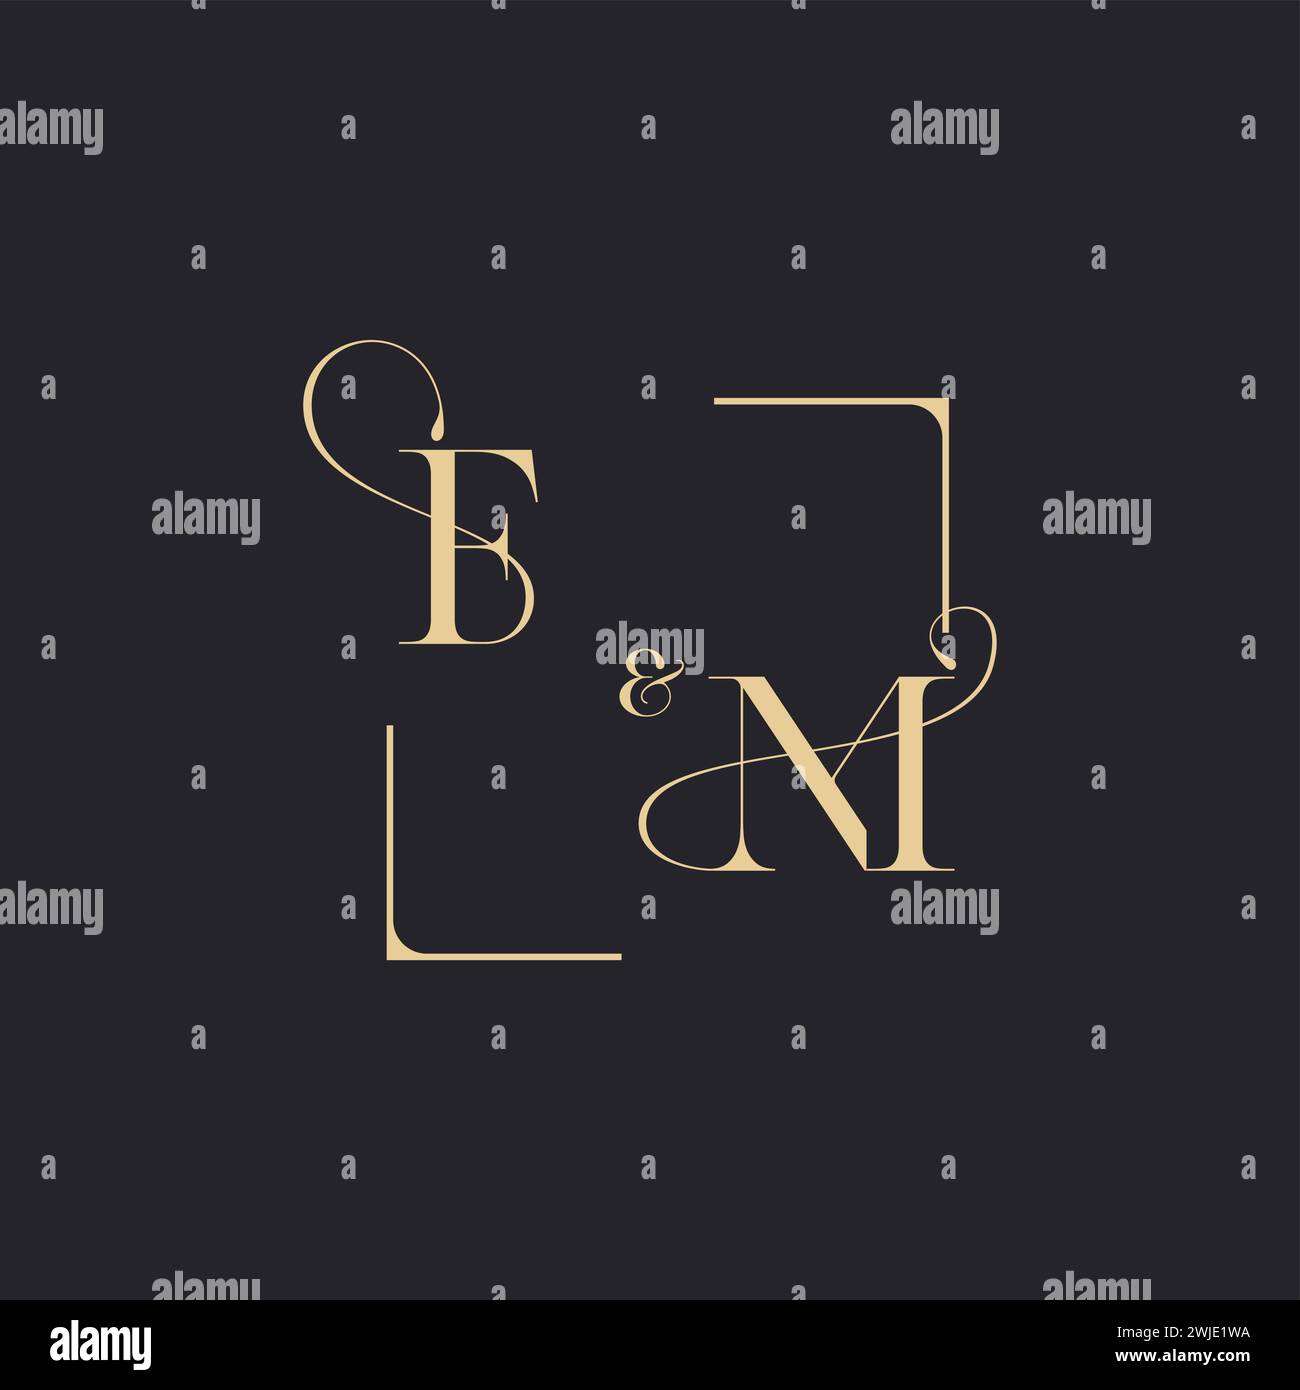 FM simple concept of wedding outline logo and square of initial design gold in white background Stock Vector